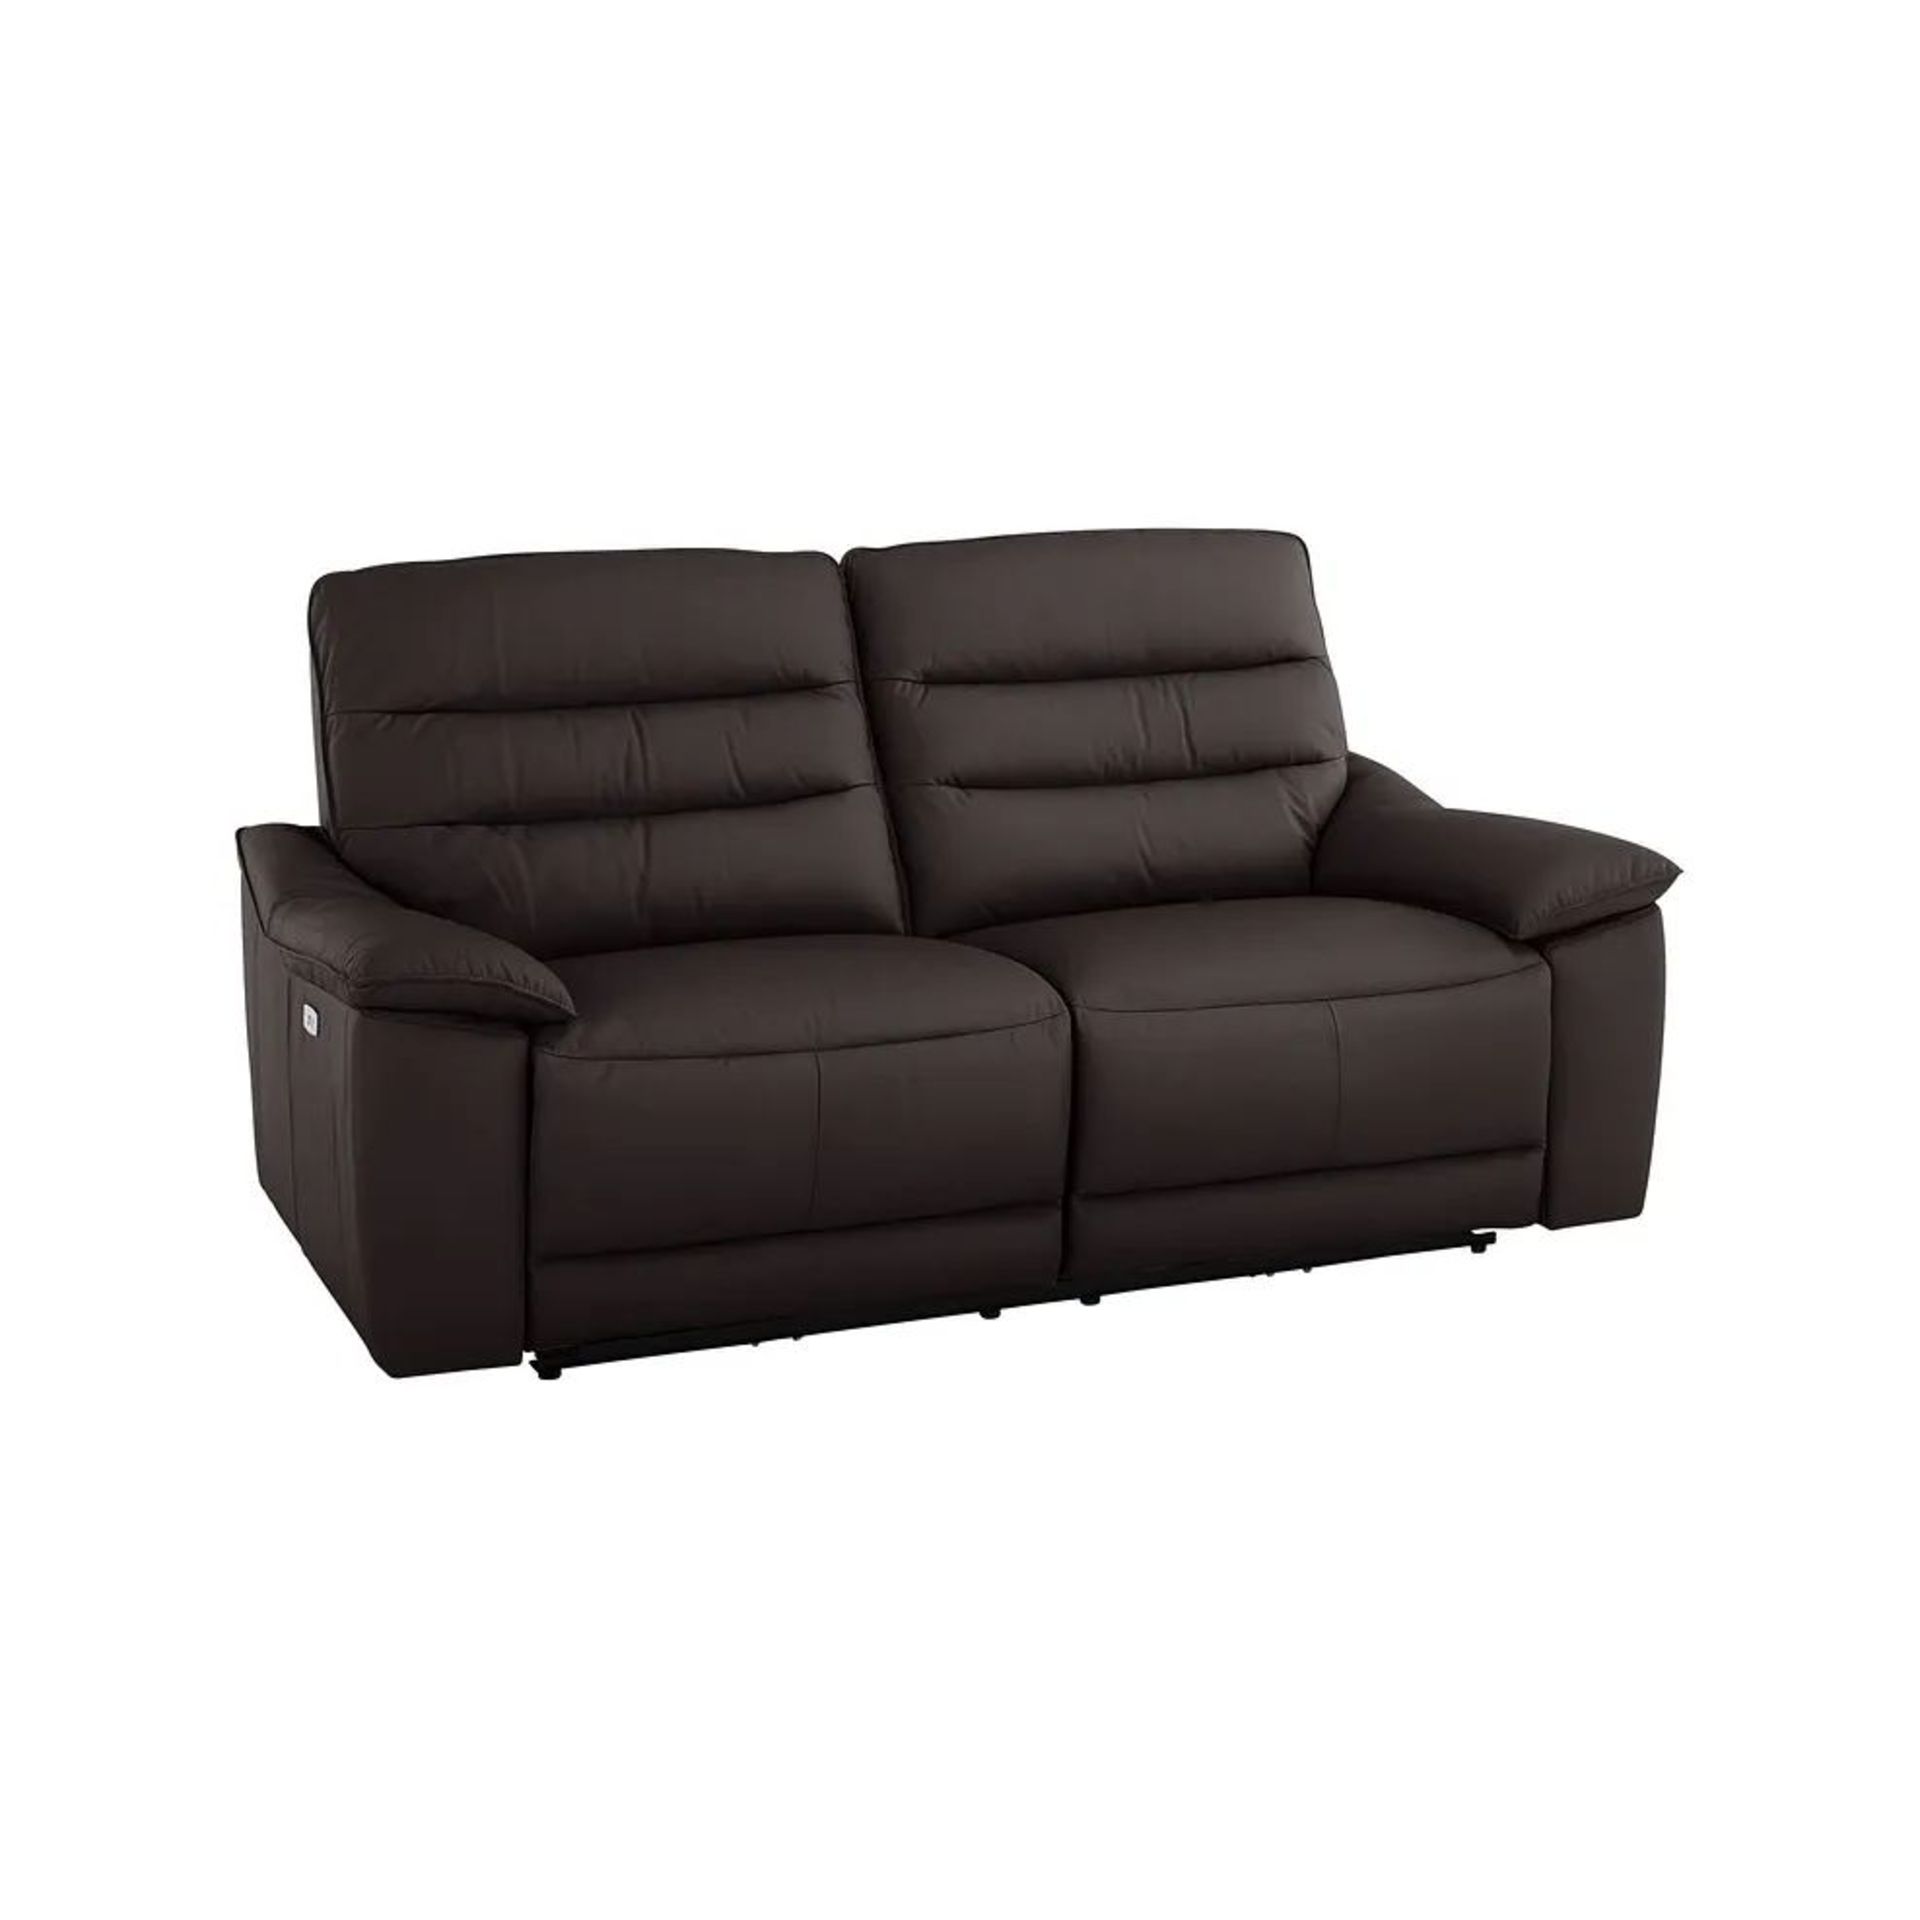 BRAND NEW CARTER 3 Seater Electric Recliner Sofa - BROWN LEATHER. RRP £1699. Showcasing classic